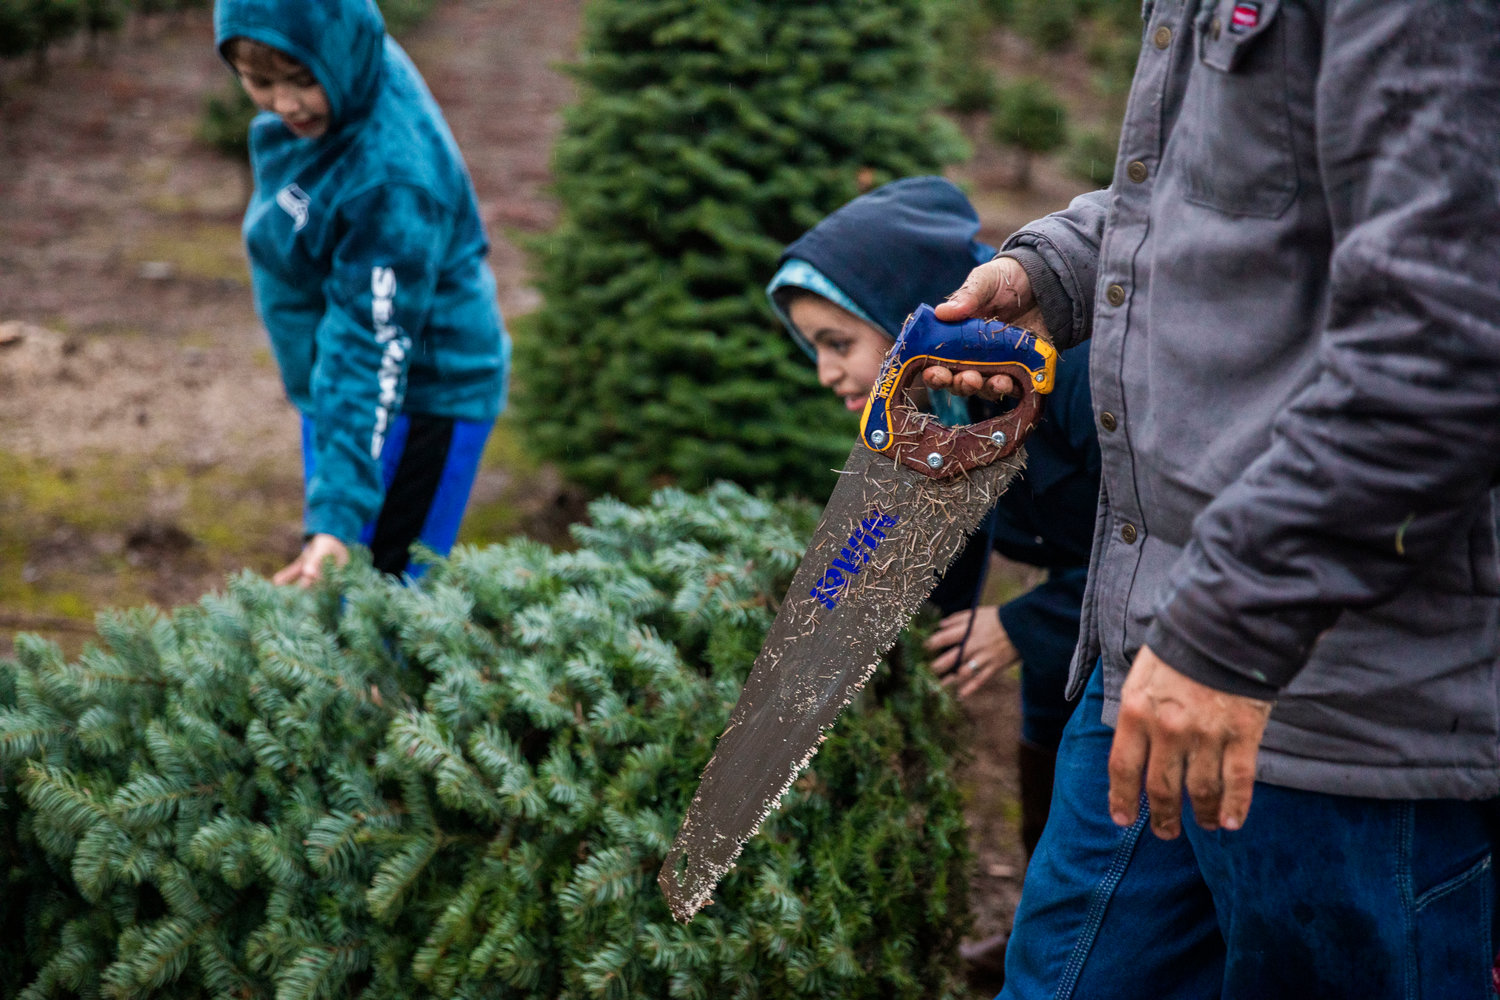 Tyler Nunez uses a saw to cut down trees at the Mistletoe Tree Farm west of Chehalis on Friday.